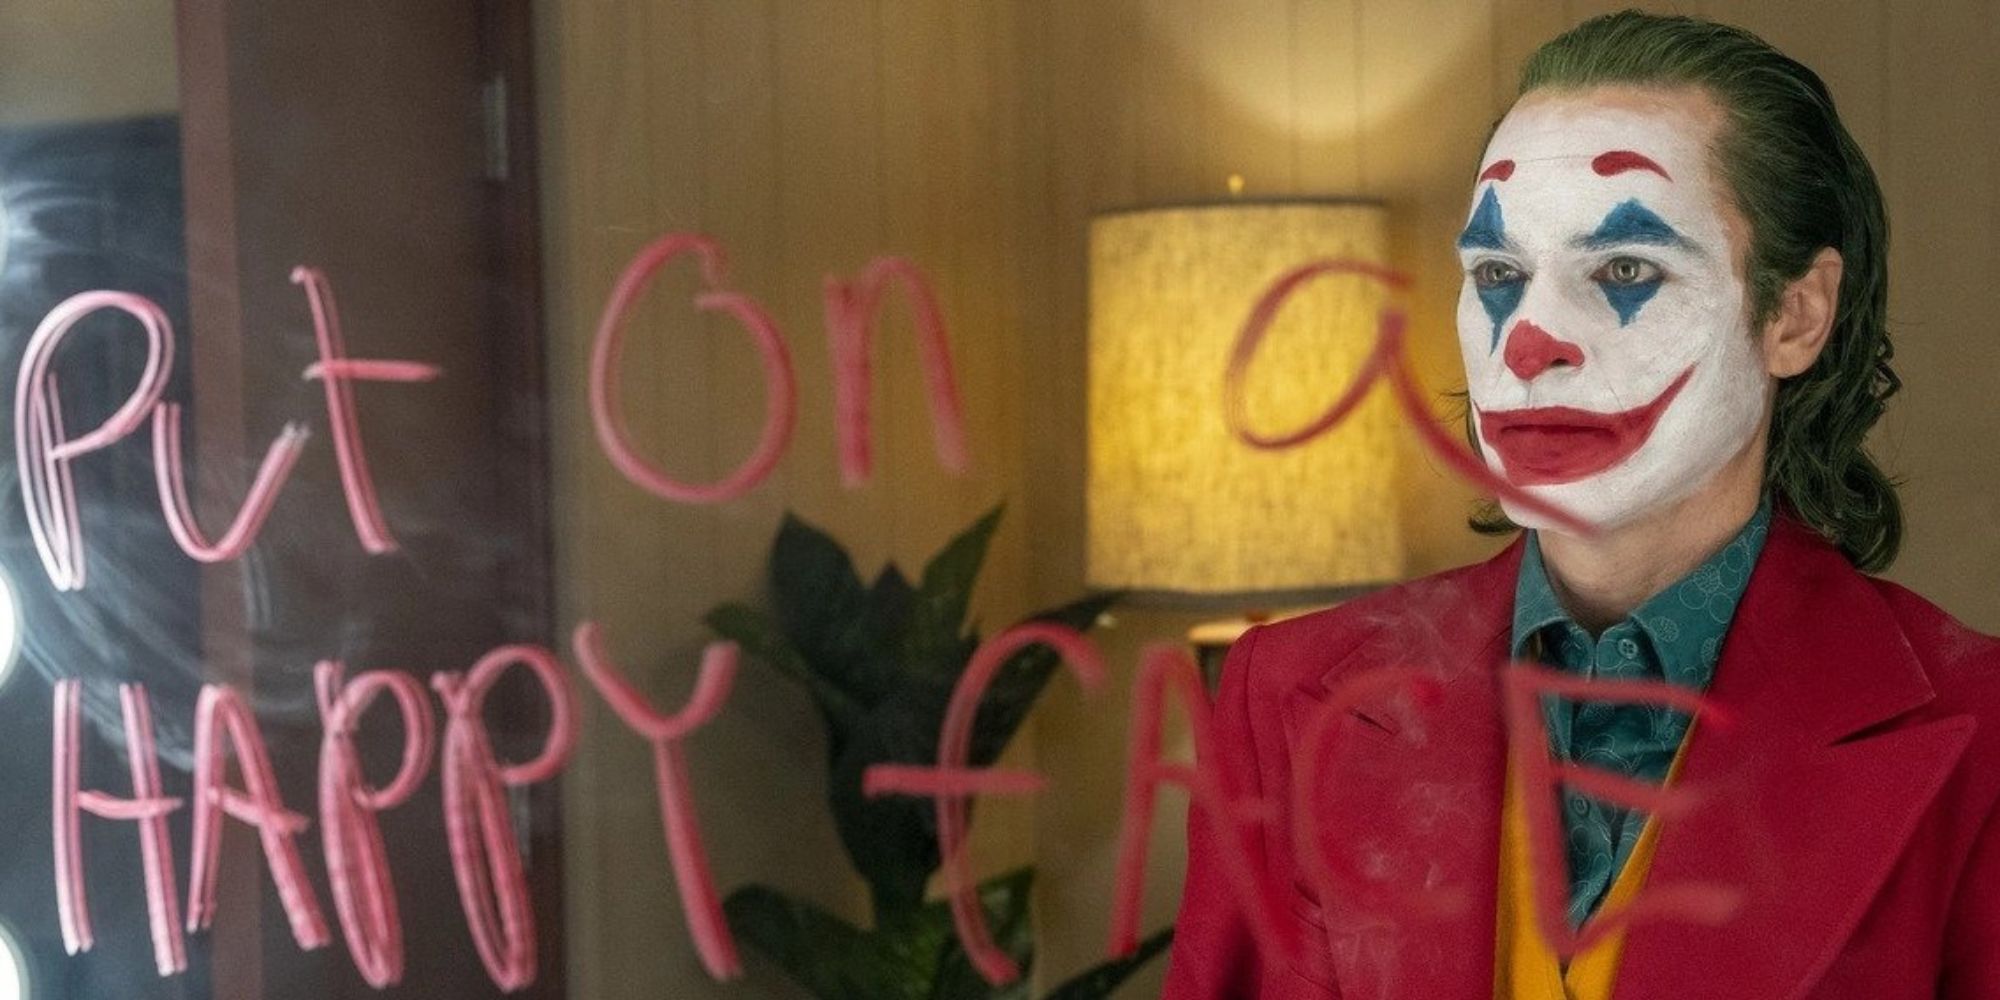 Joker standing in front of a mirror that says "put on a happy face"